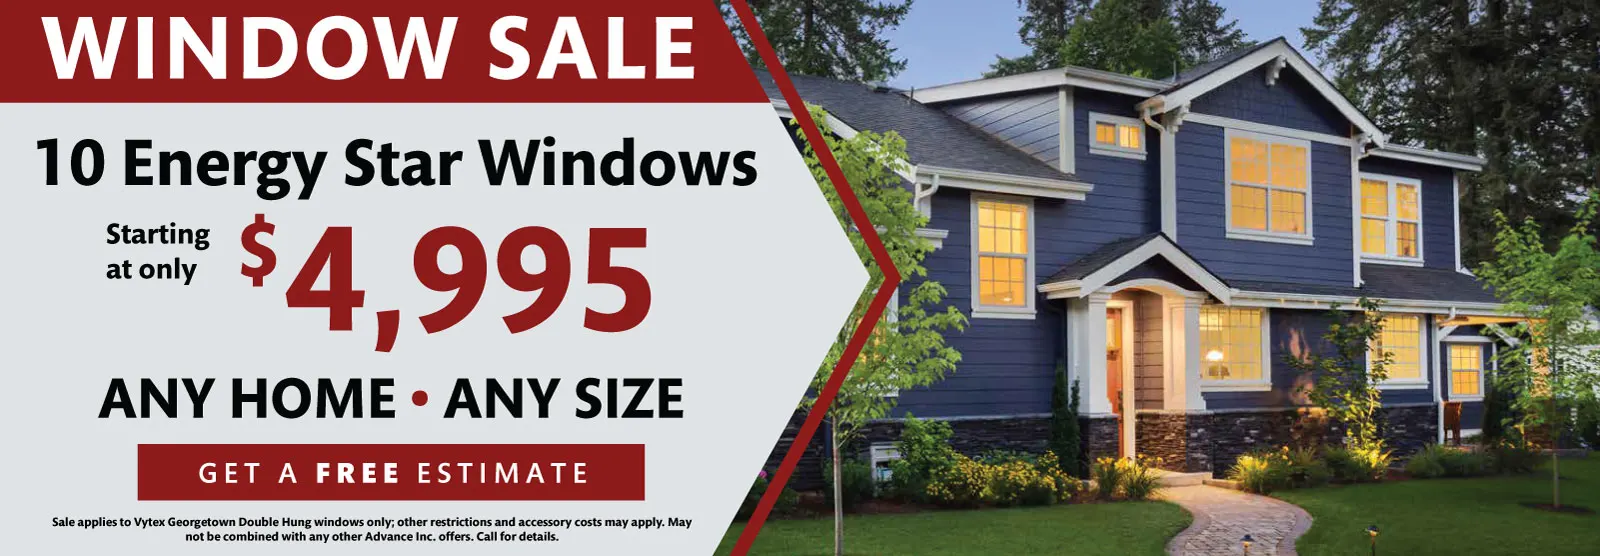 10 ENERGY STAR WINDOWS STARTING AT ONLY $4,995